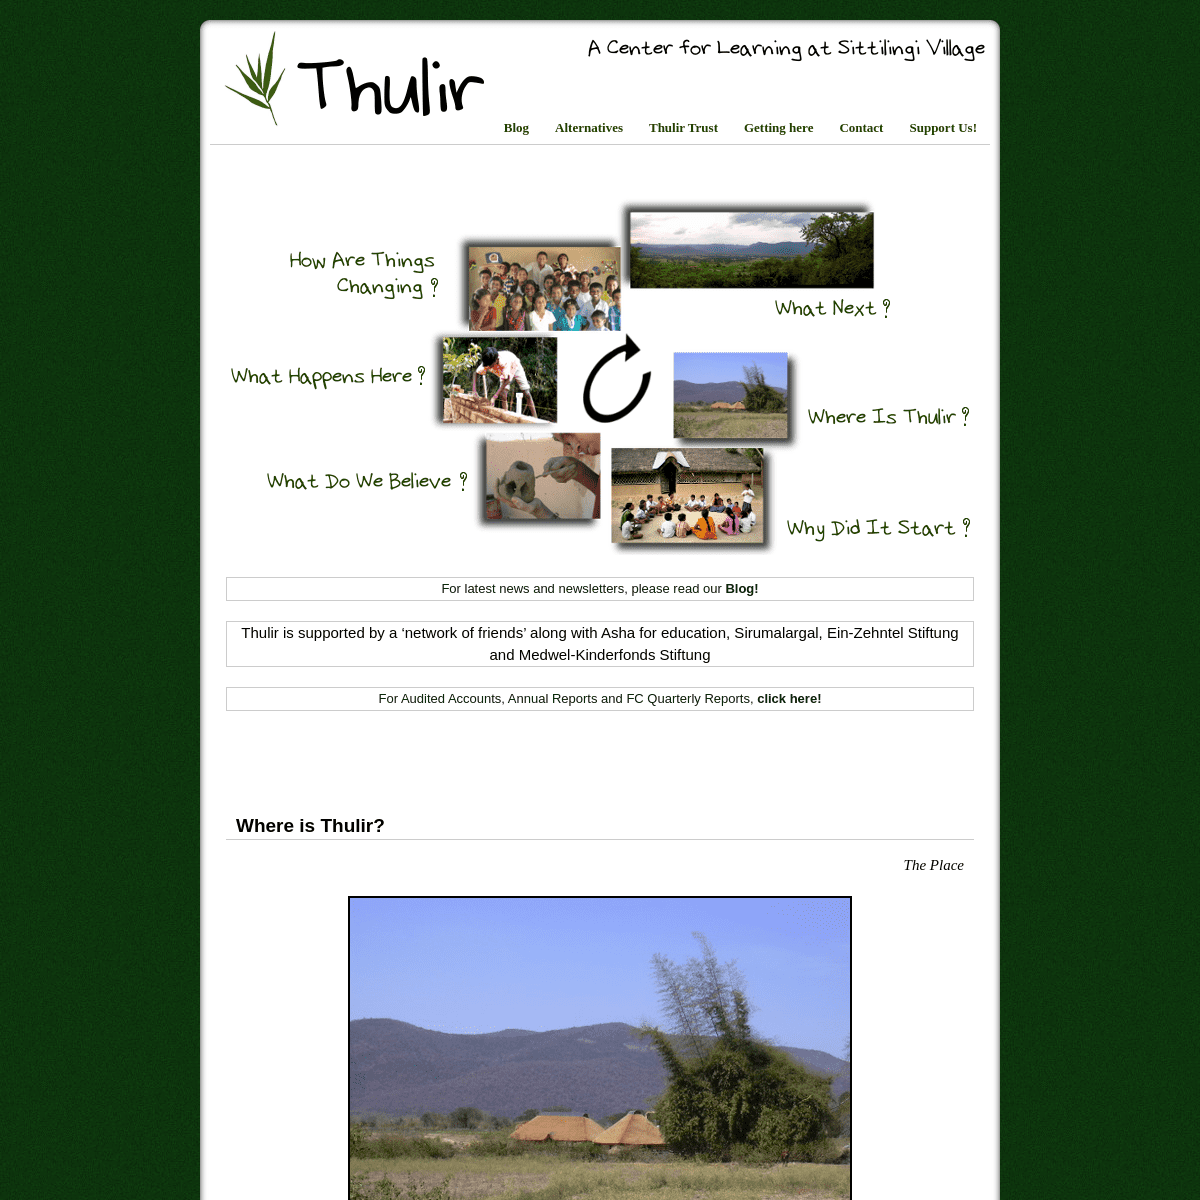 A complete backup of thulir.org